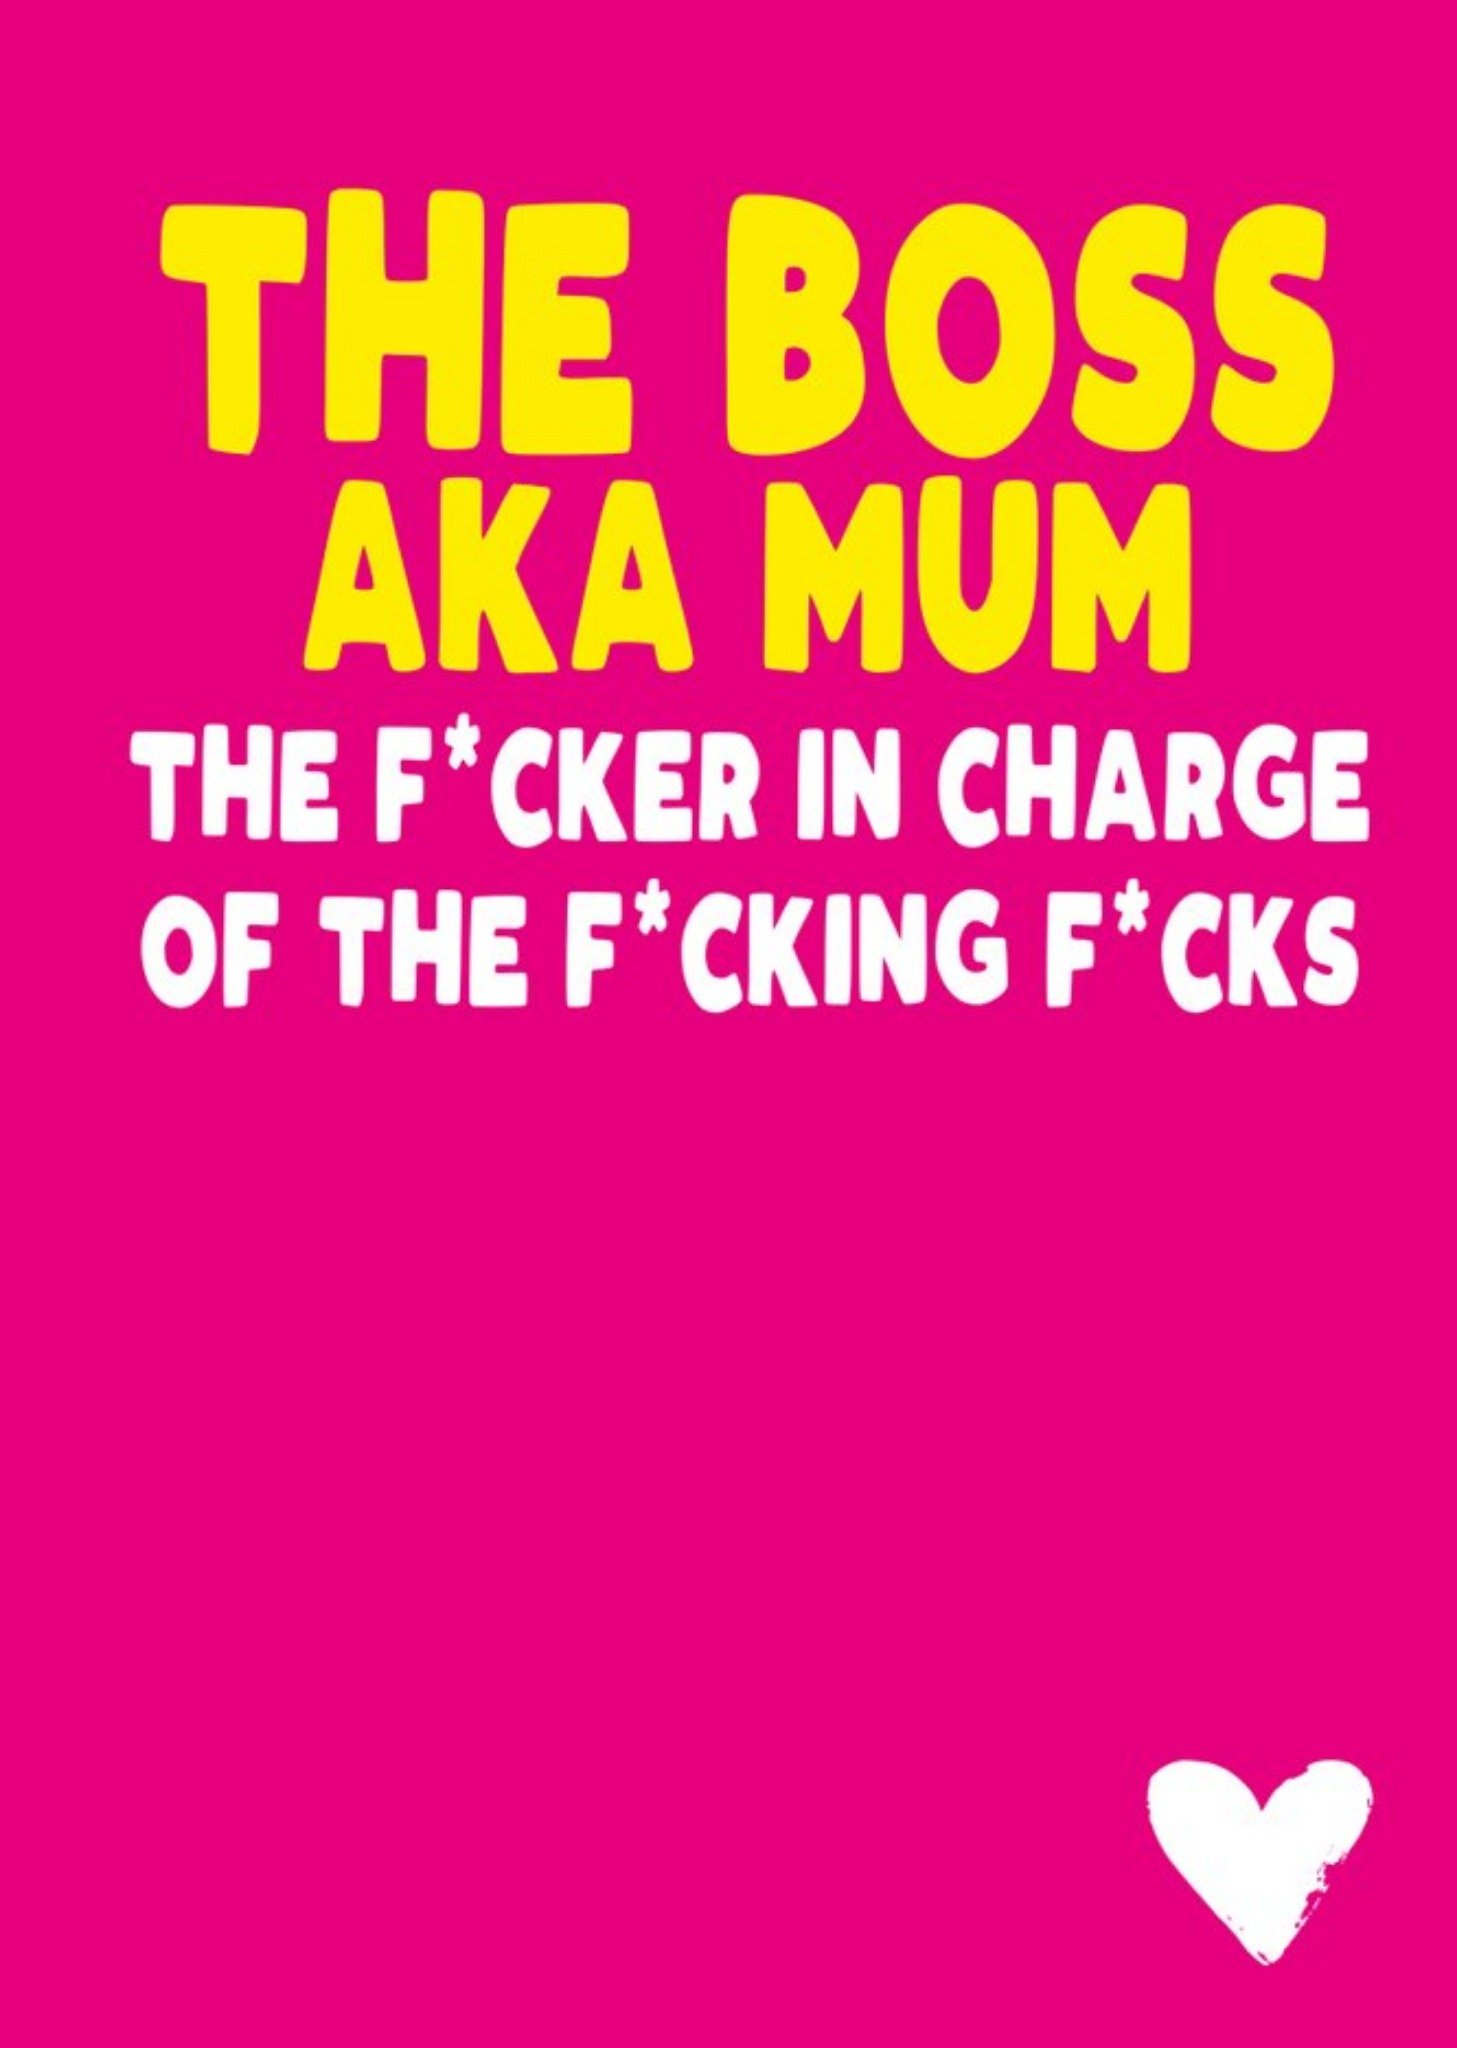 Filthy Sentiments Funny Rude Typography The Boss Aka Mum Card Ecard